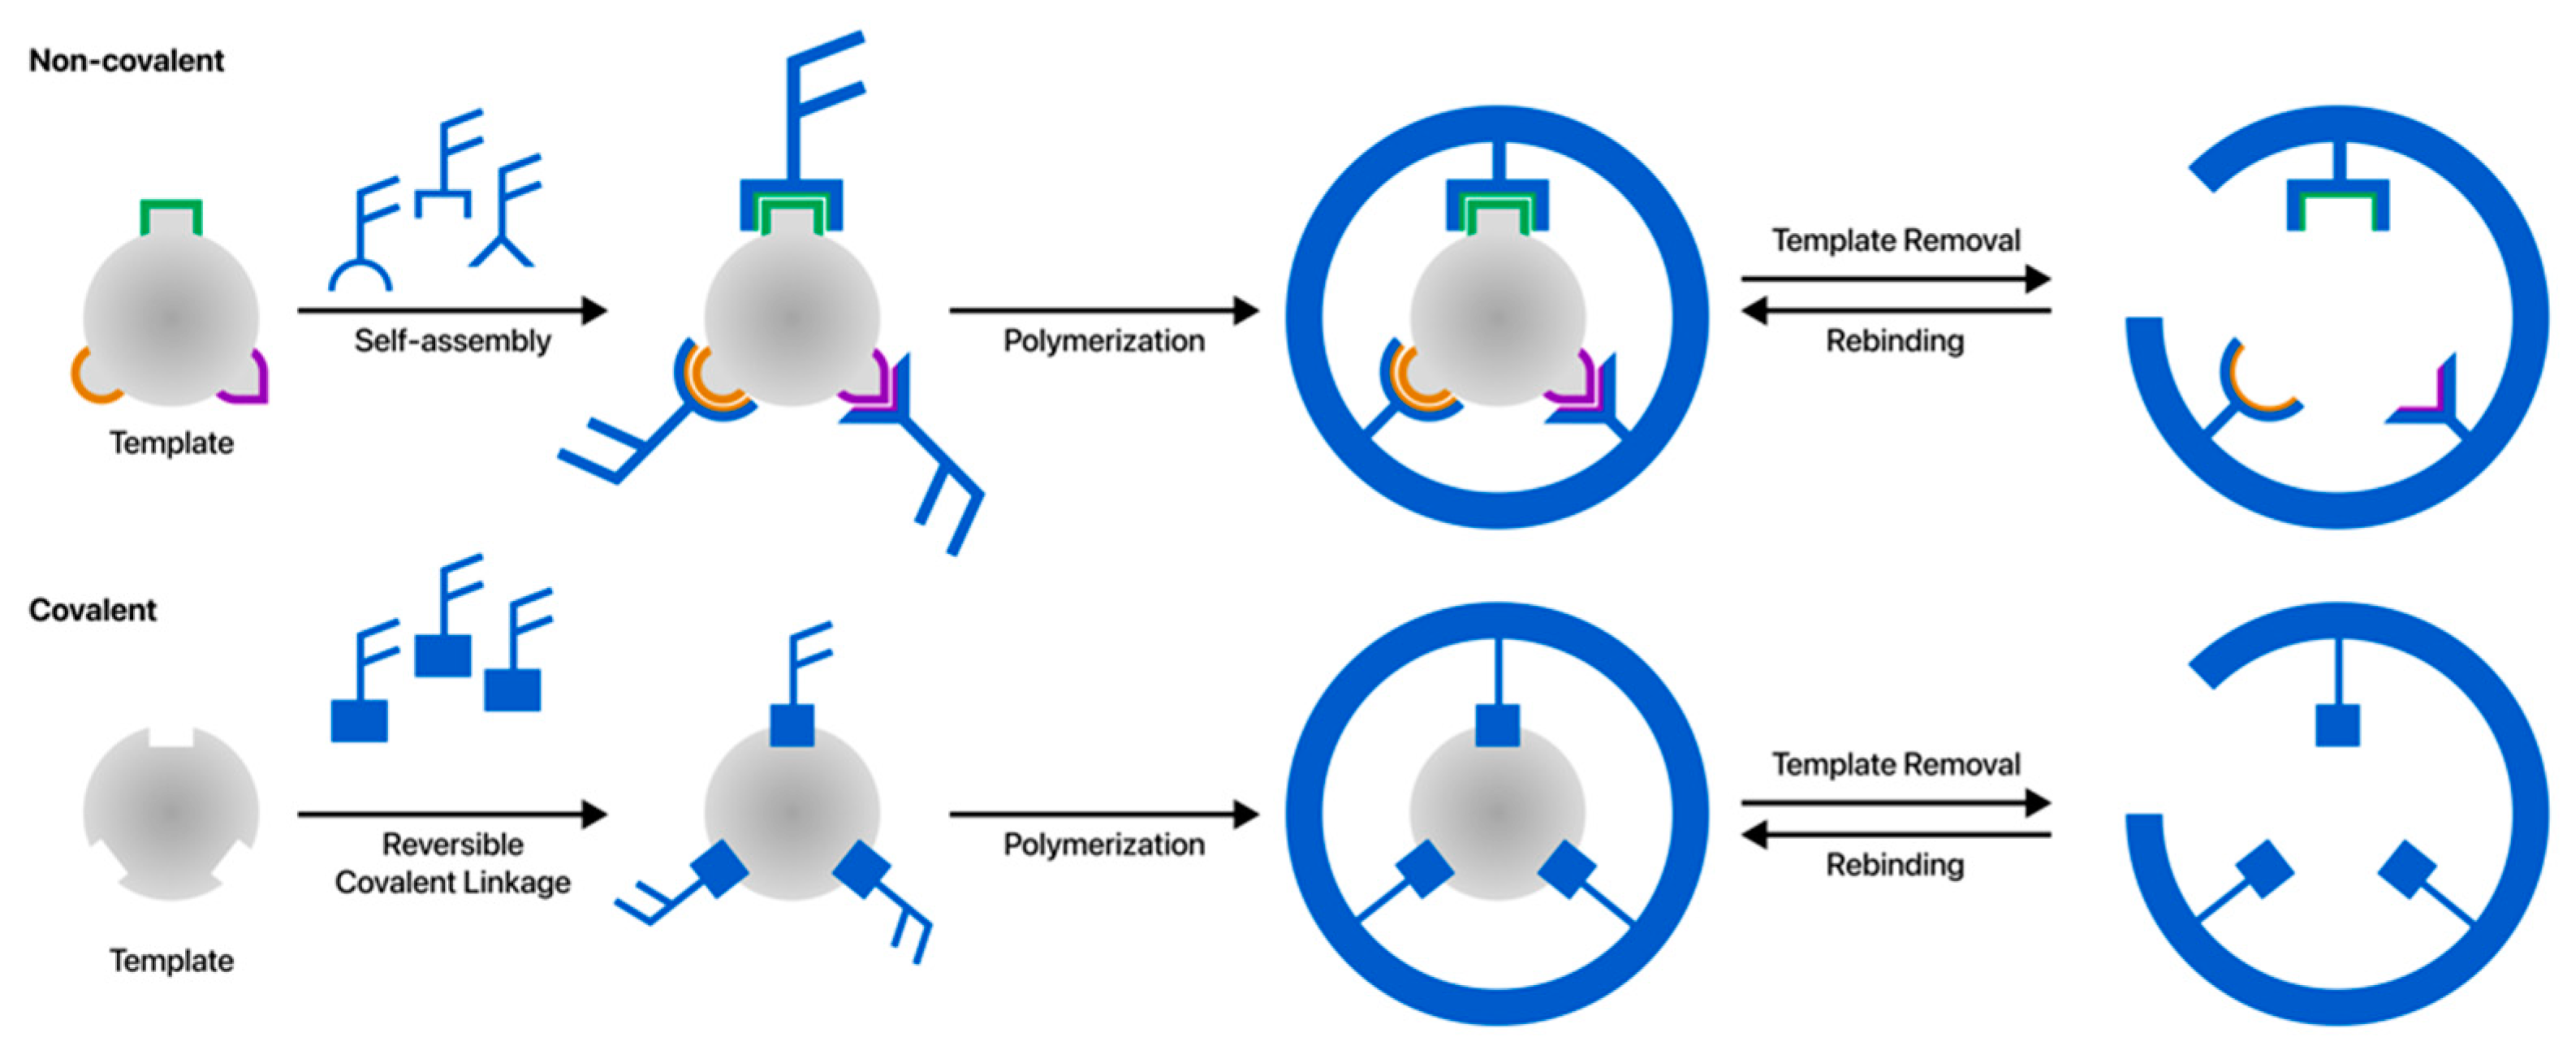 polymers-free-full-text-molecularly-imprinted-polymer-based-sensors-for-protein-detection